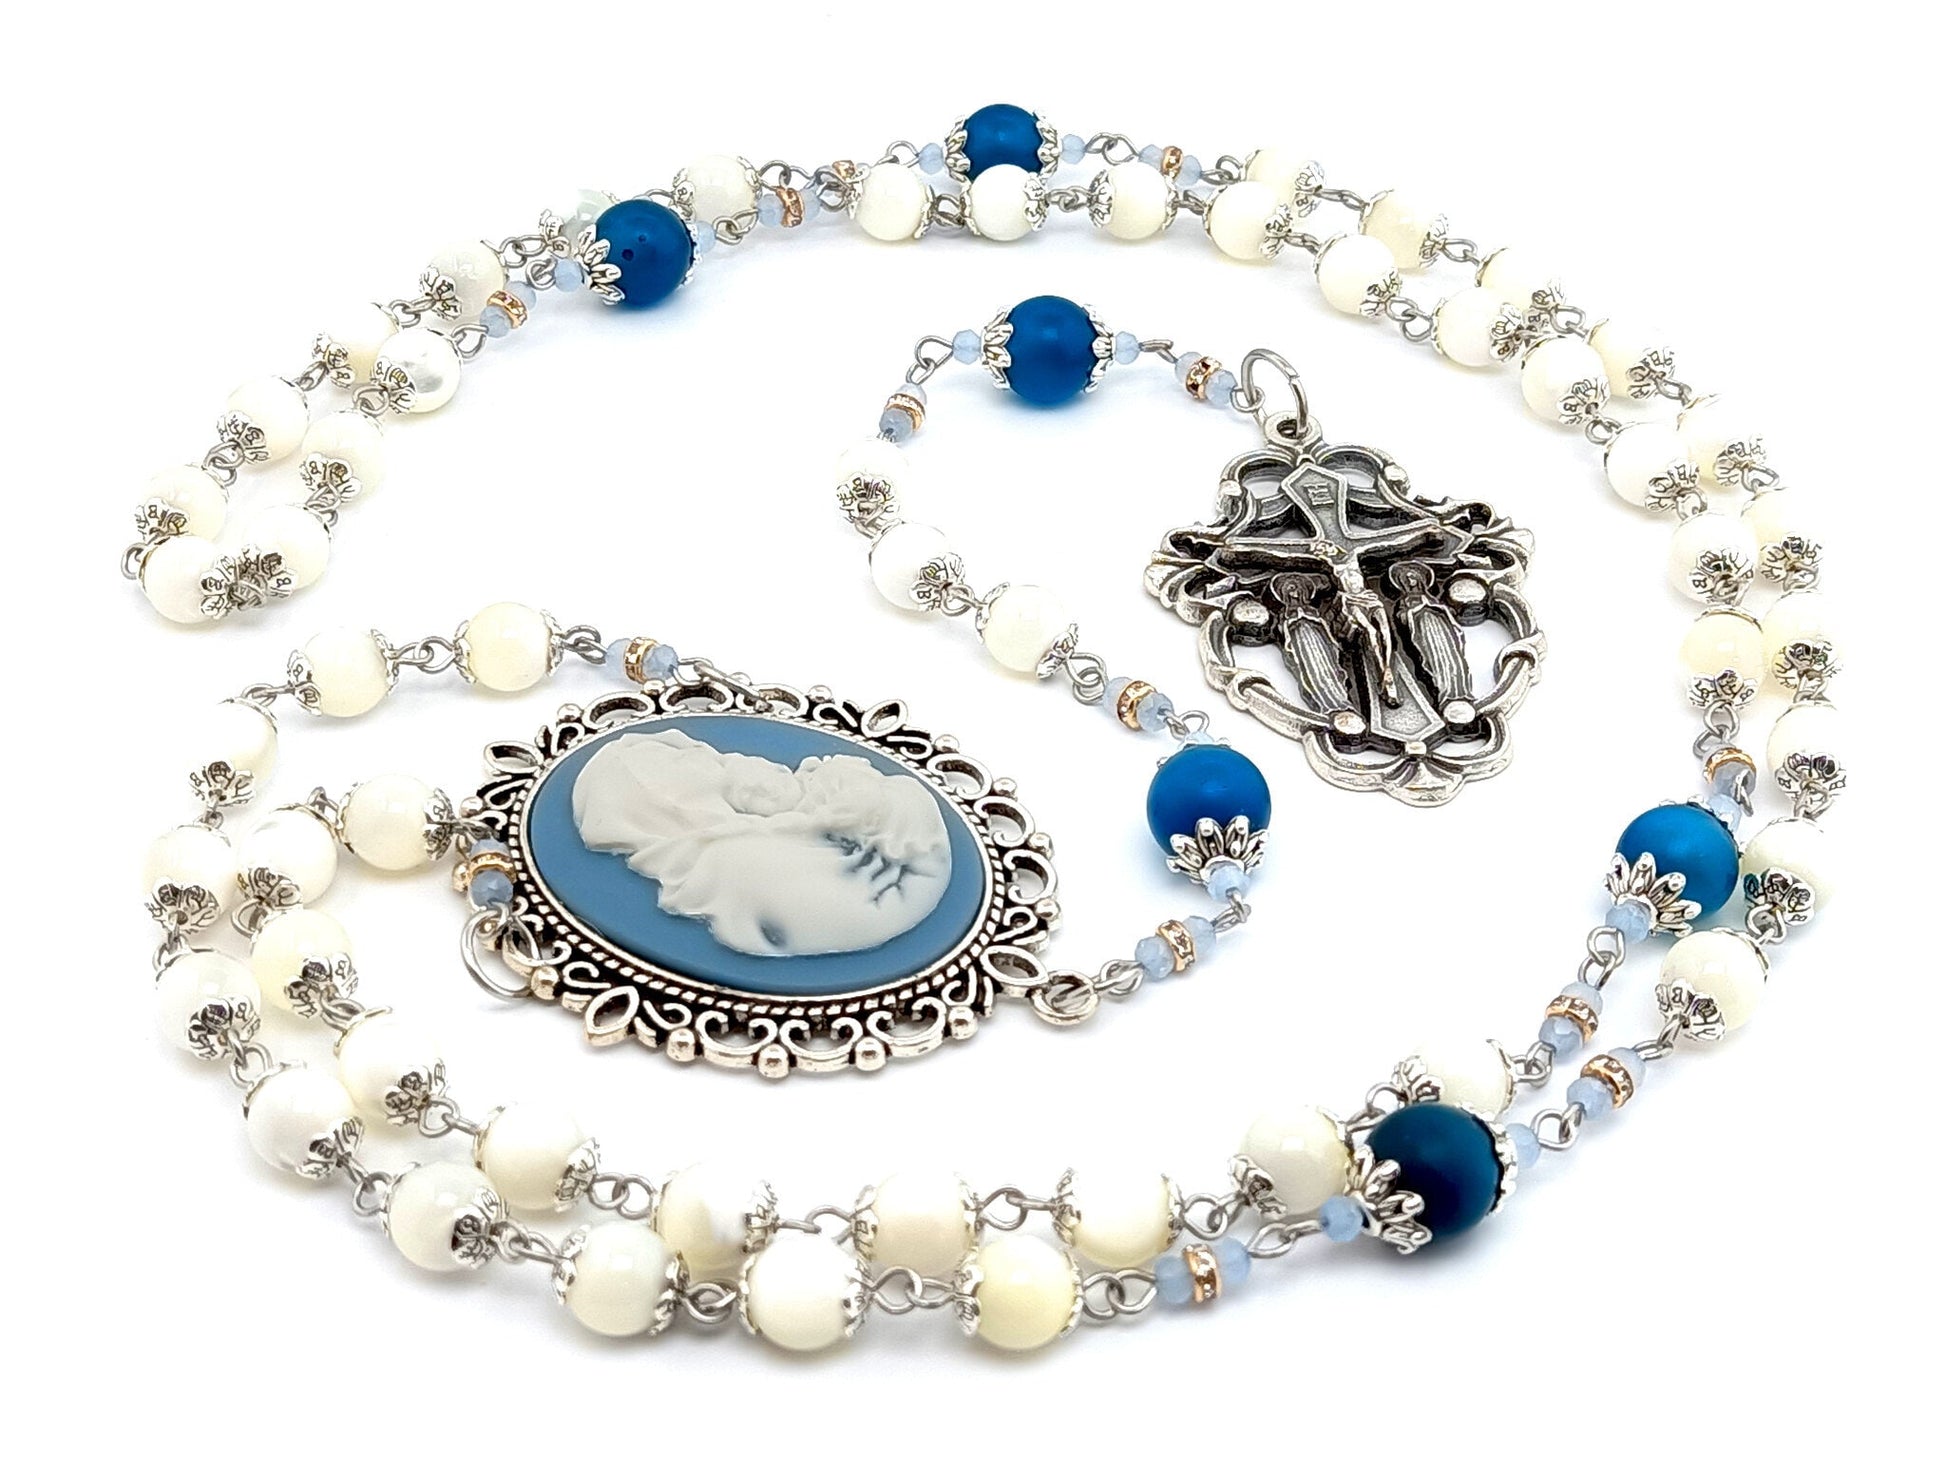 Virgin Mary cameo unique rosary beads with mother of pearl and agate rosary beads with Holy Angel crucifix.